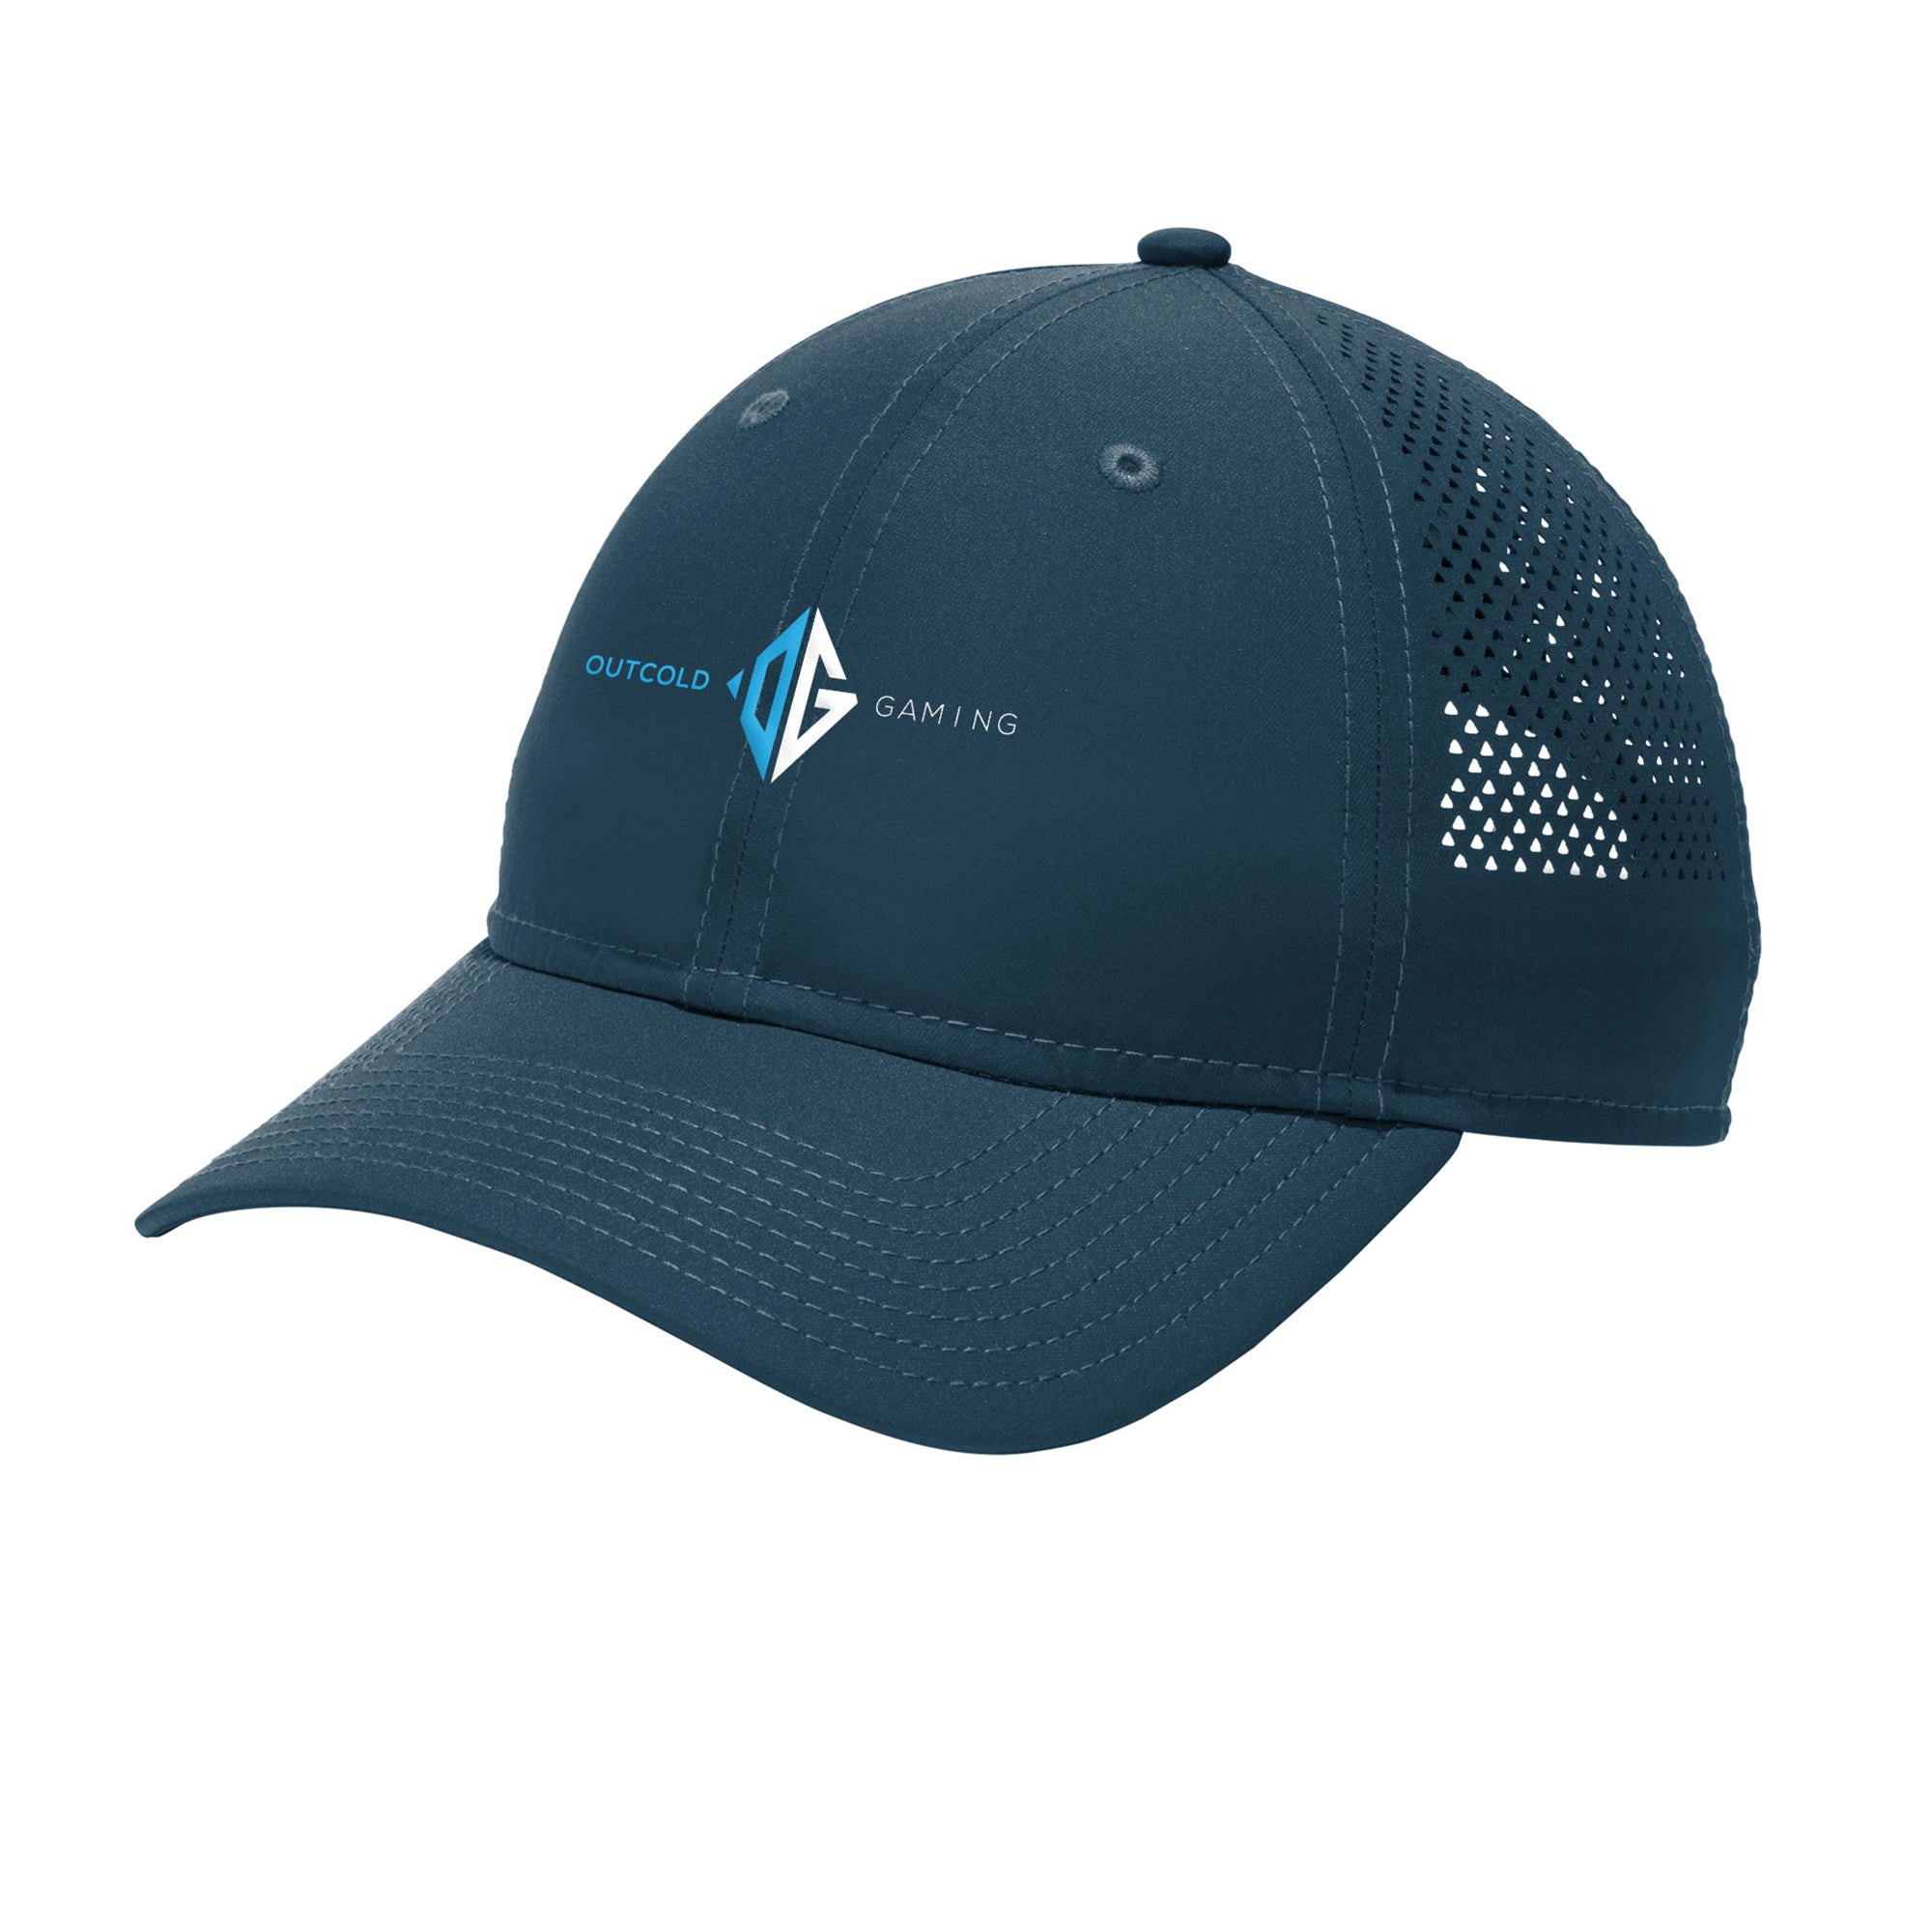 OutCold Gaming Classic New Era Performance Cap